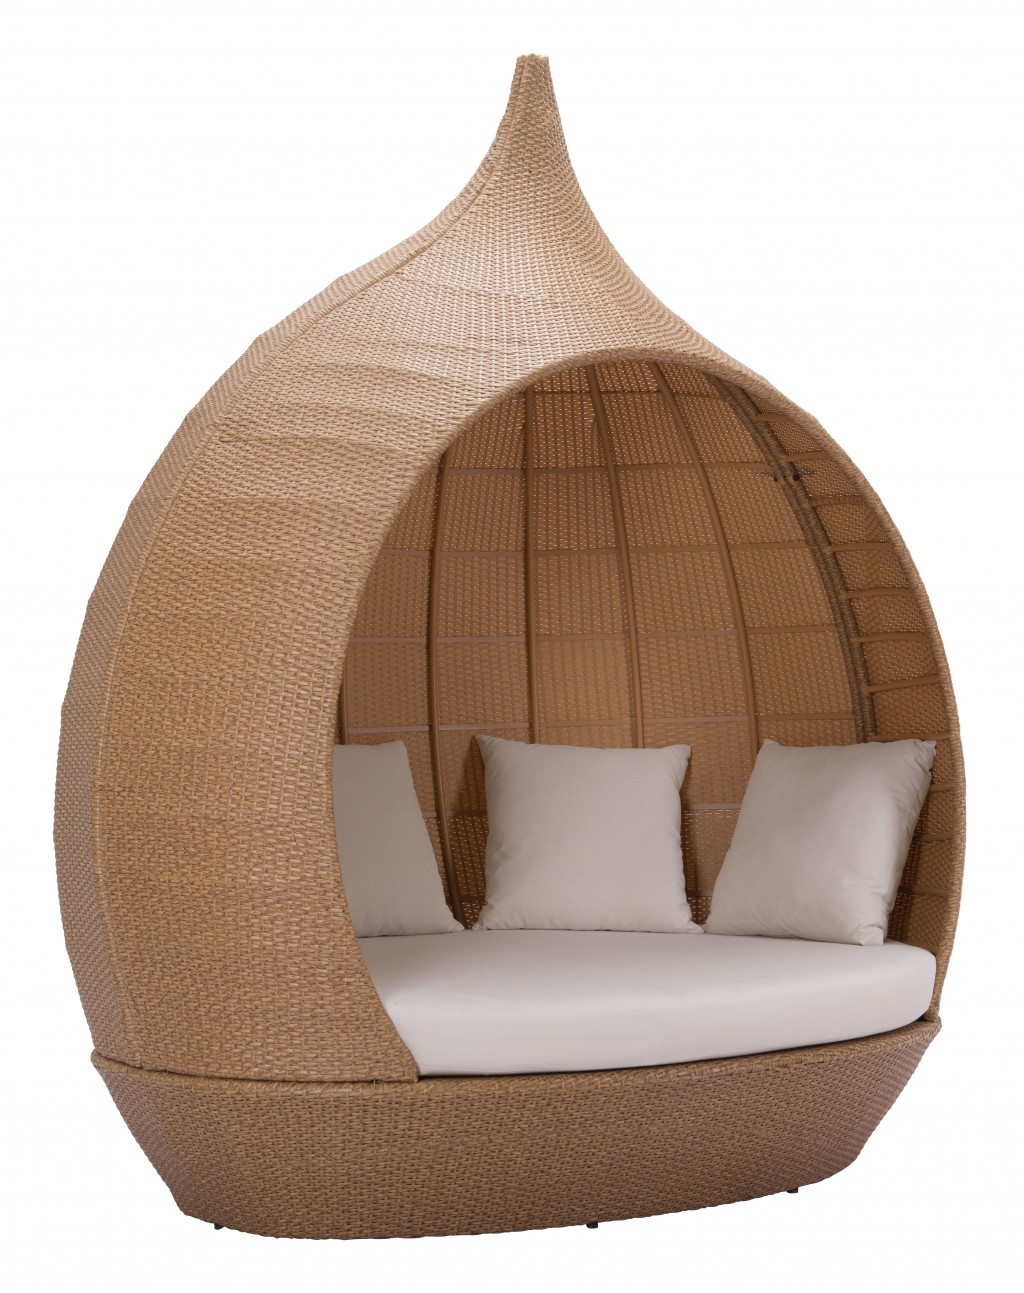 Teardrop Shaped Beige and Natural Daybed